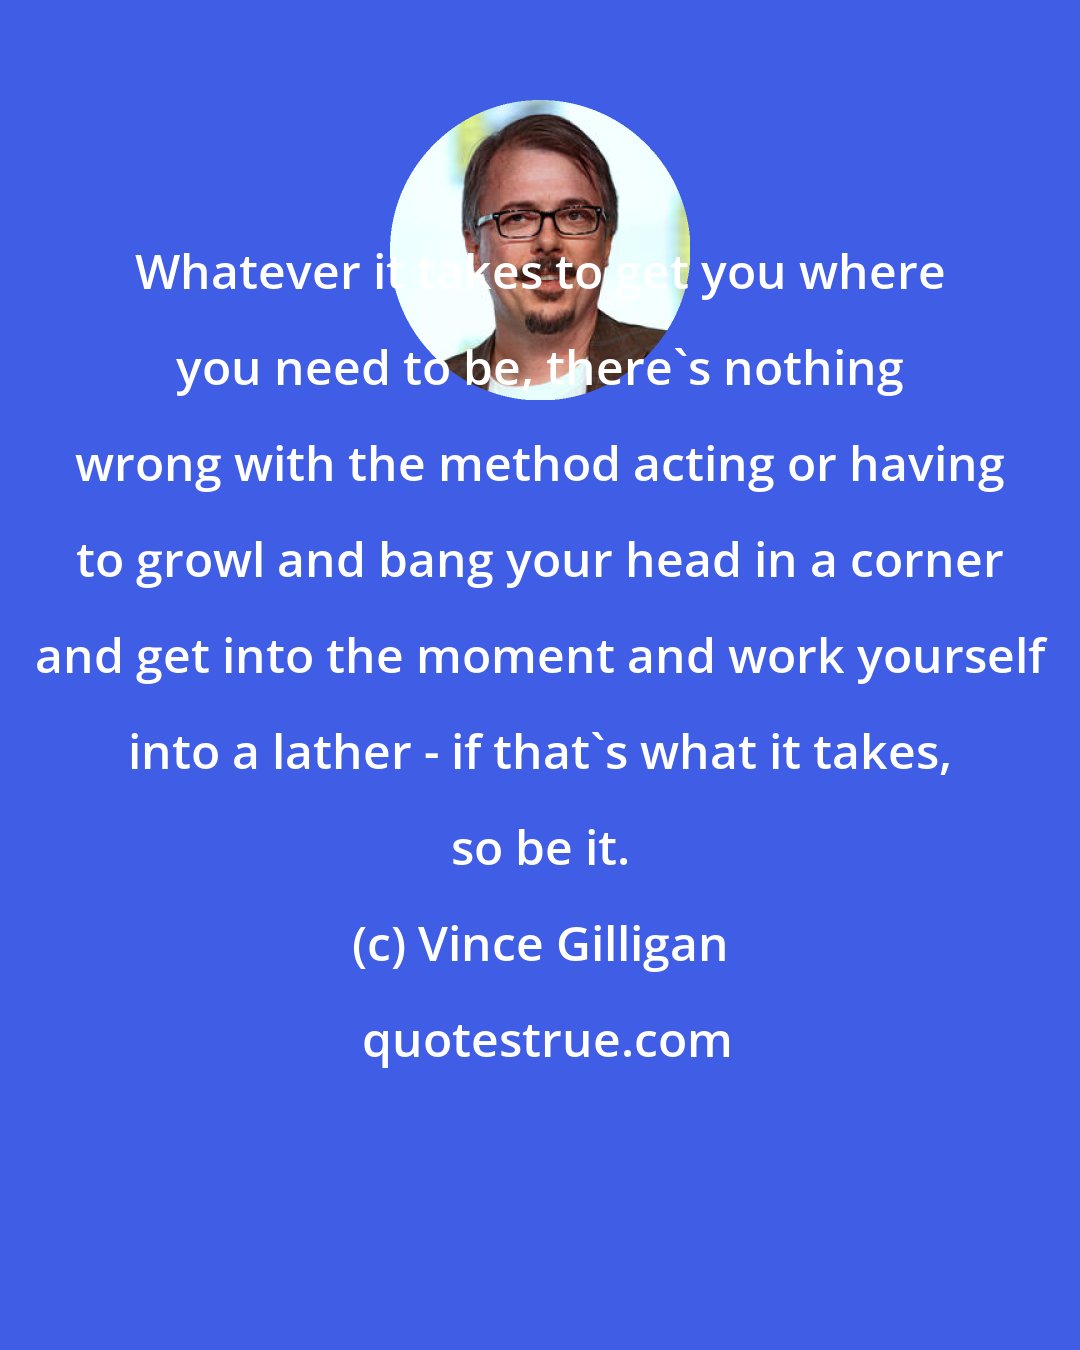 Vince Gilligan: Whatever it takes to get you where you need to be, there's nothing wrong with the method acting or having to growl and bang your head in a corner and get into the moment and work yourself into a lather - if that's what it takes, so be it.